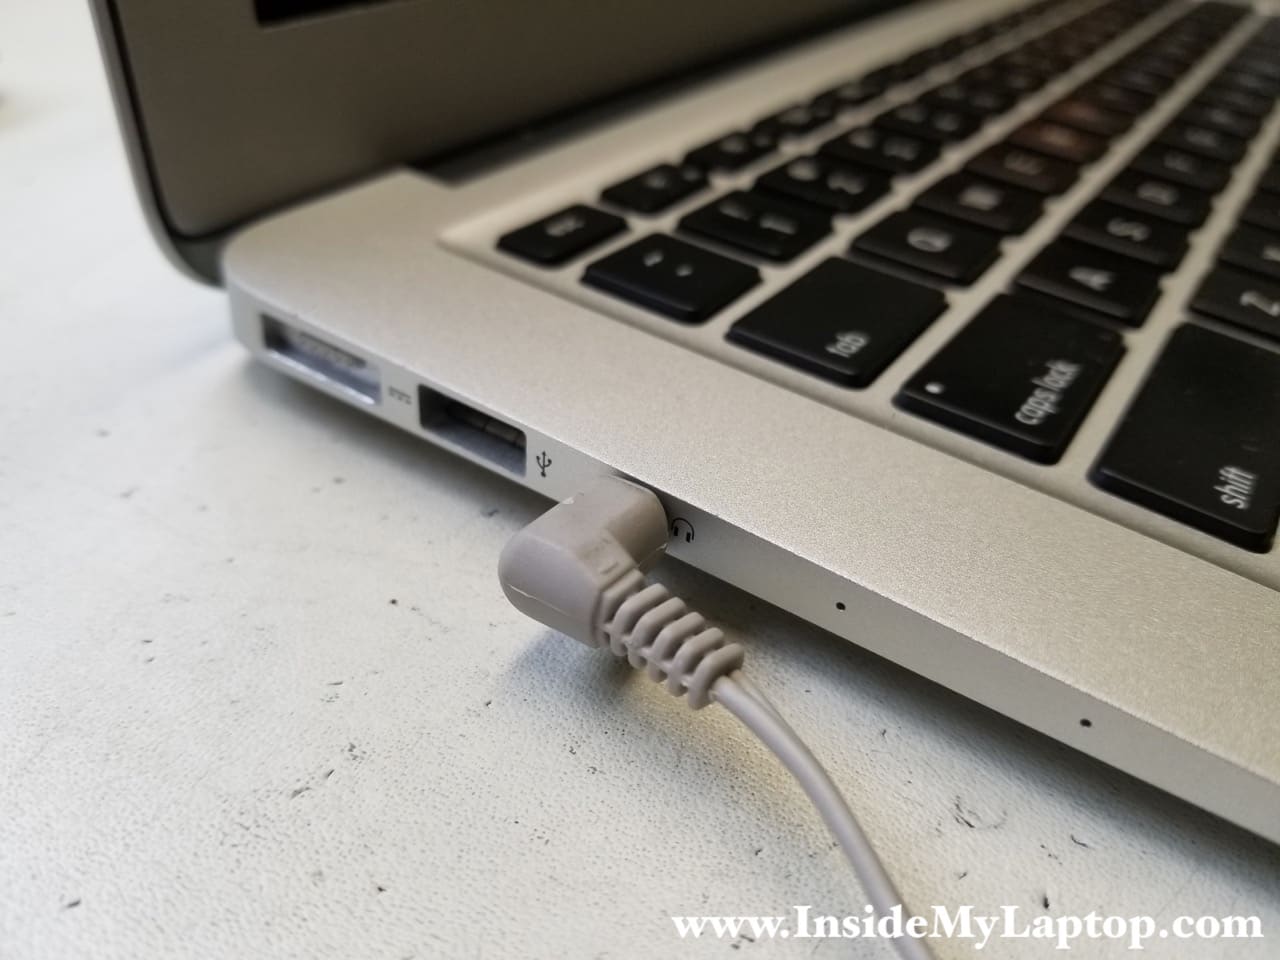 Check Physical Connections: Ensure that the headphone jack is securely plugged into the MacBook Air.
Inspect Headphone Cable: Examine the headphone cable for any signs of damage or fraying.